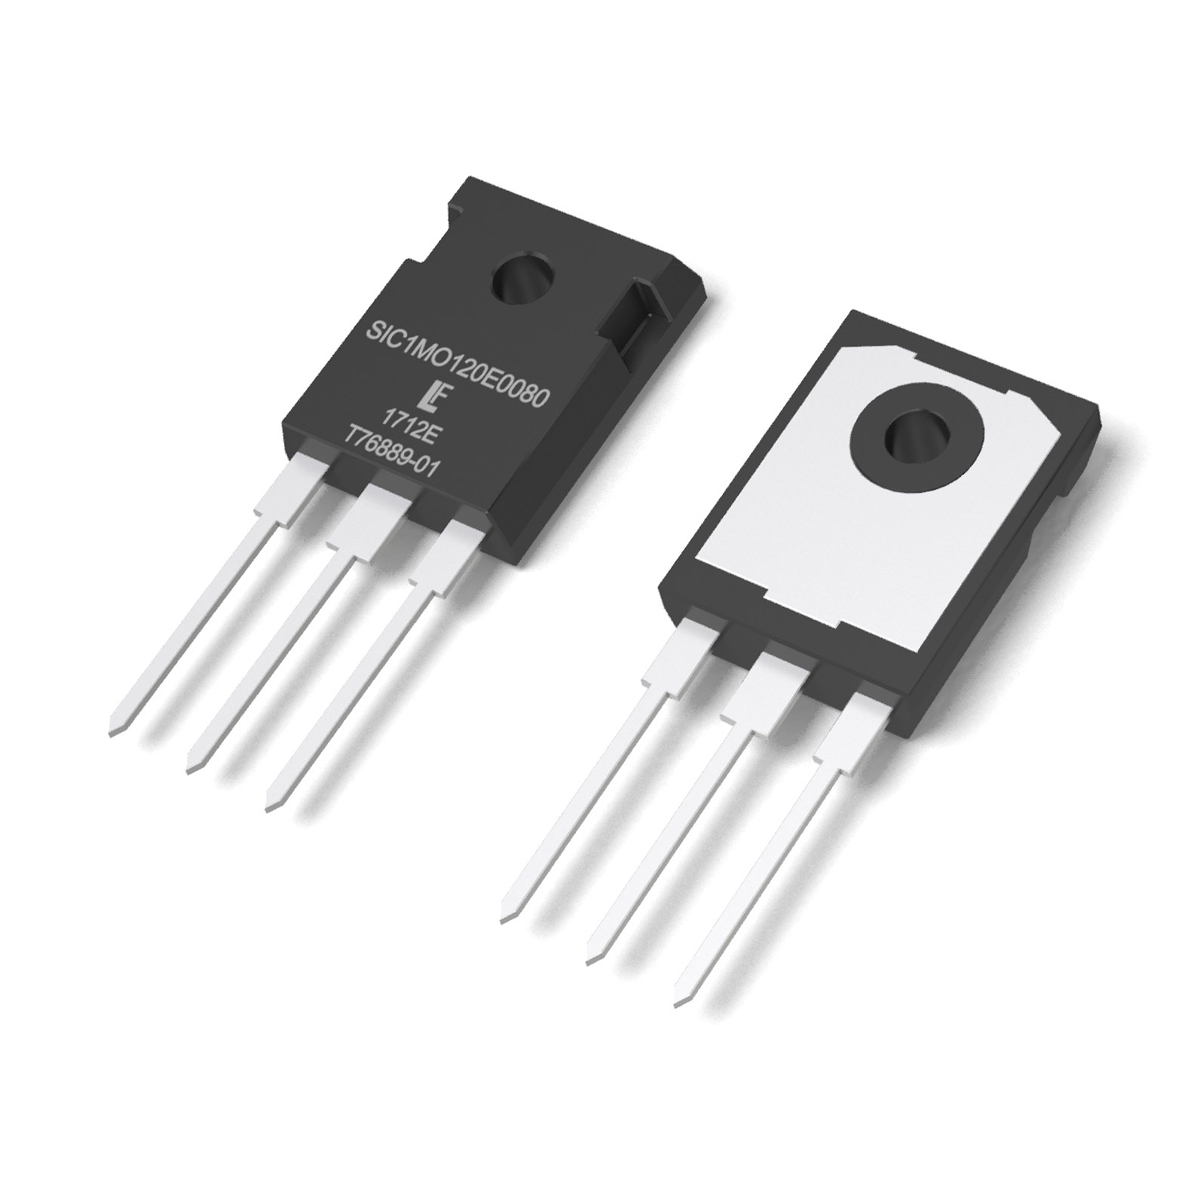 SiC MOSFET Provides Ultra-Fast Switching in Power Electronics